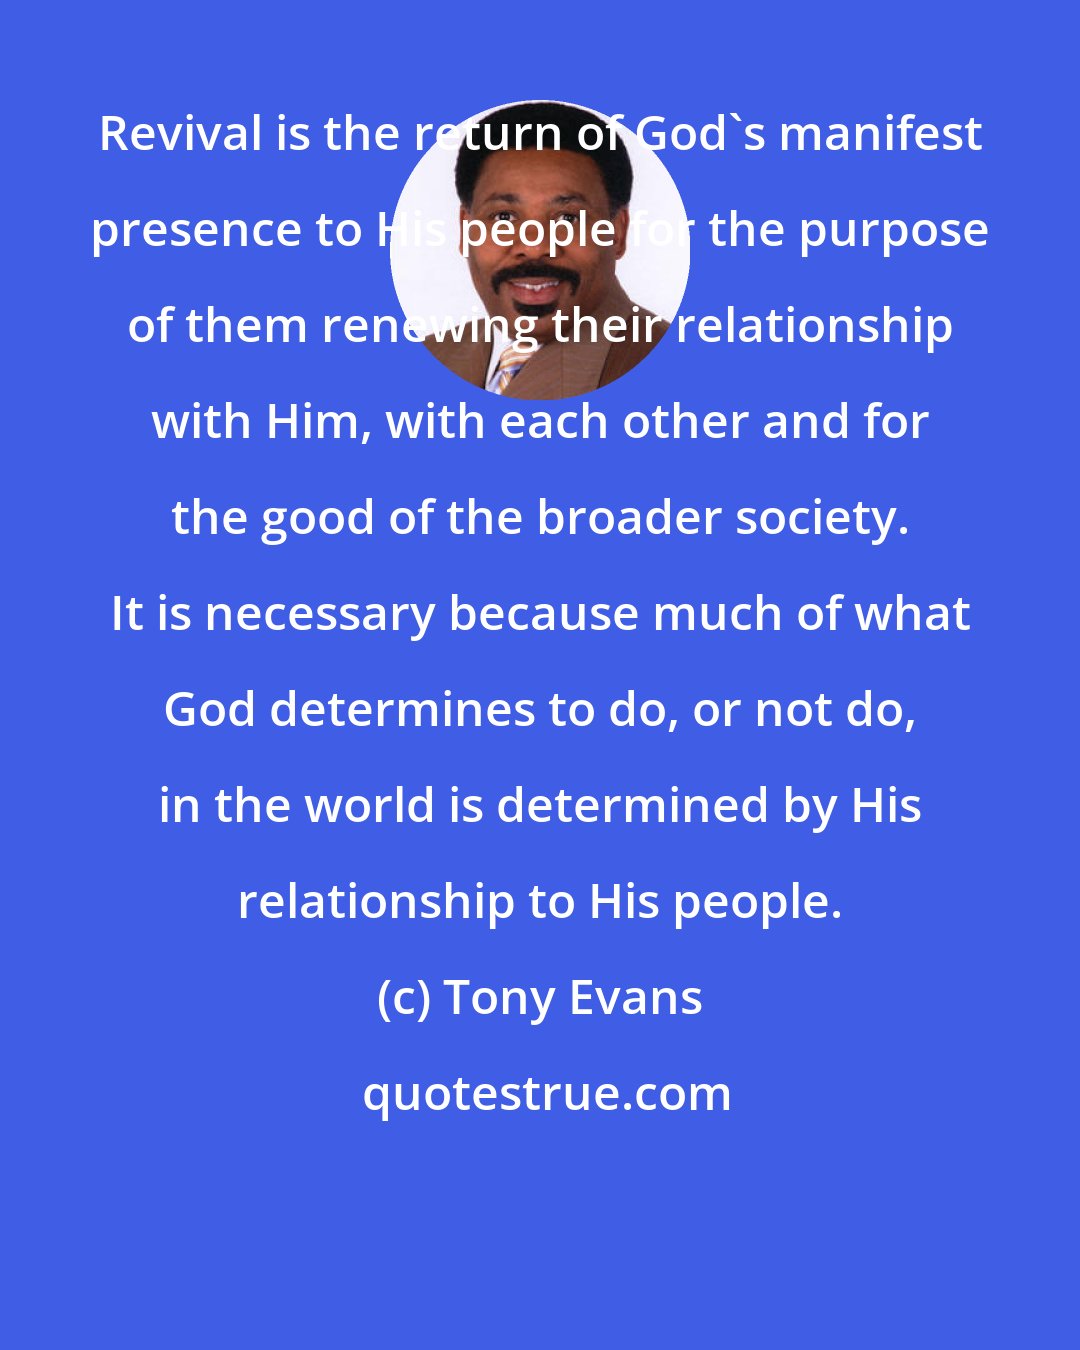 Tony Evans: Revival is the return of God's manifest presence to His people for the purpose of them renewing their relationship with Him, with each other and for the good of the broader society. It is necessary because much of what God determines to do, or not do, in the world is determined by His relationship to His people.